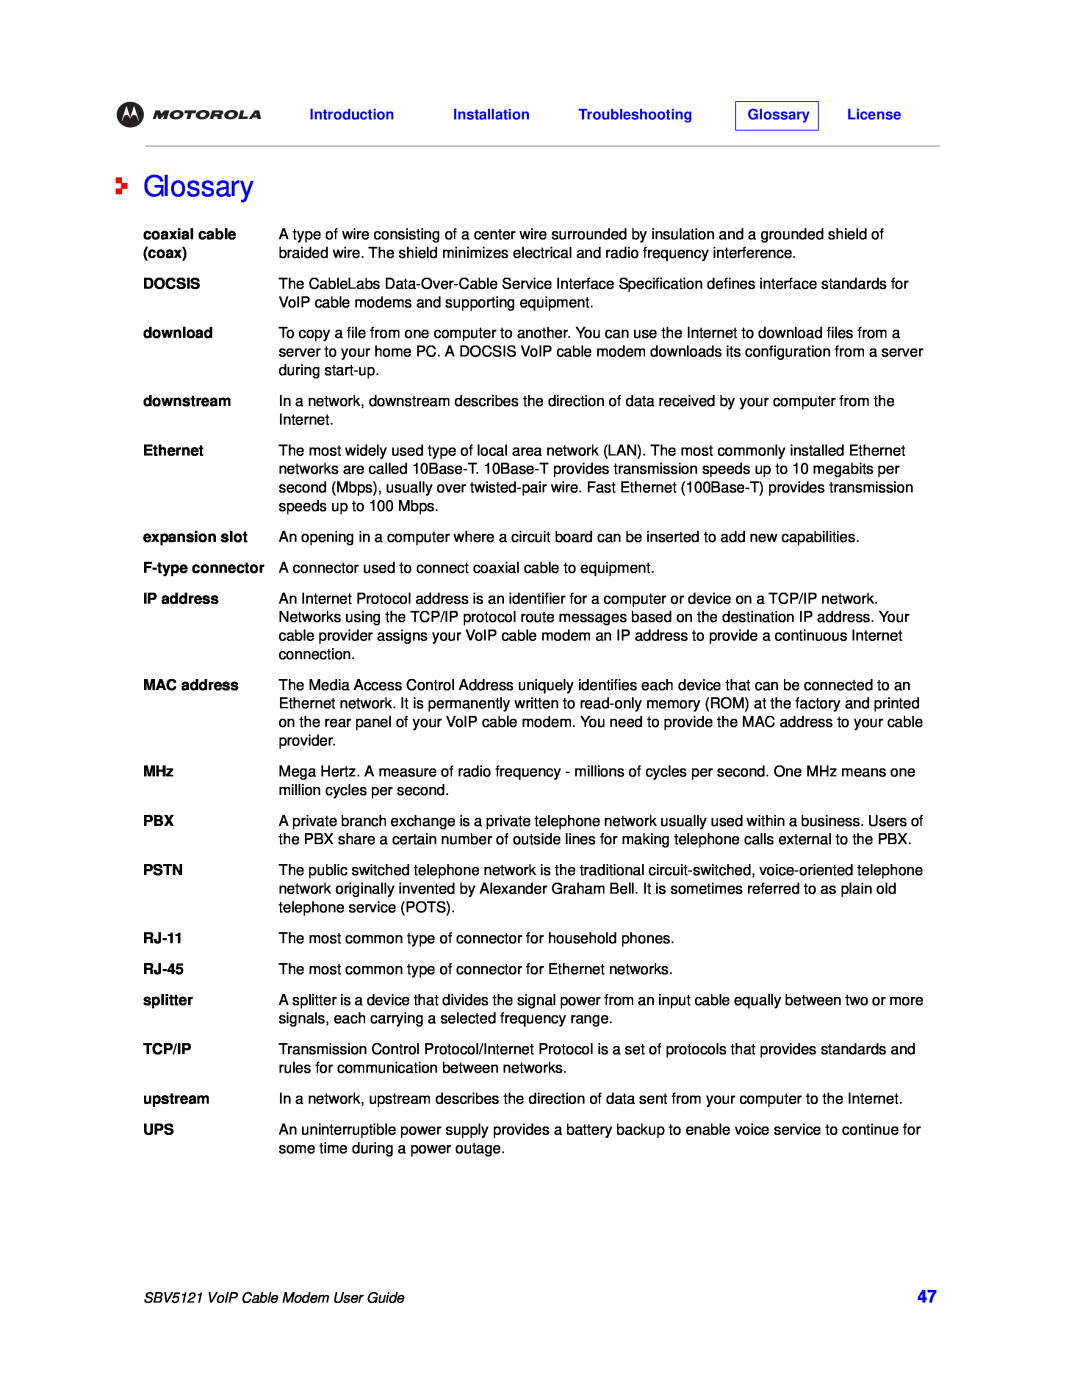 Nikon manual Glossary, Introduction Installation Troubleshooting, License, SBV5121 VoIP Cable Modem User Guide 